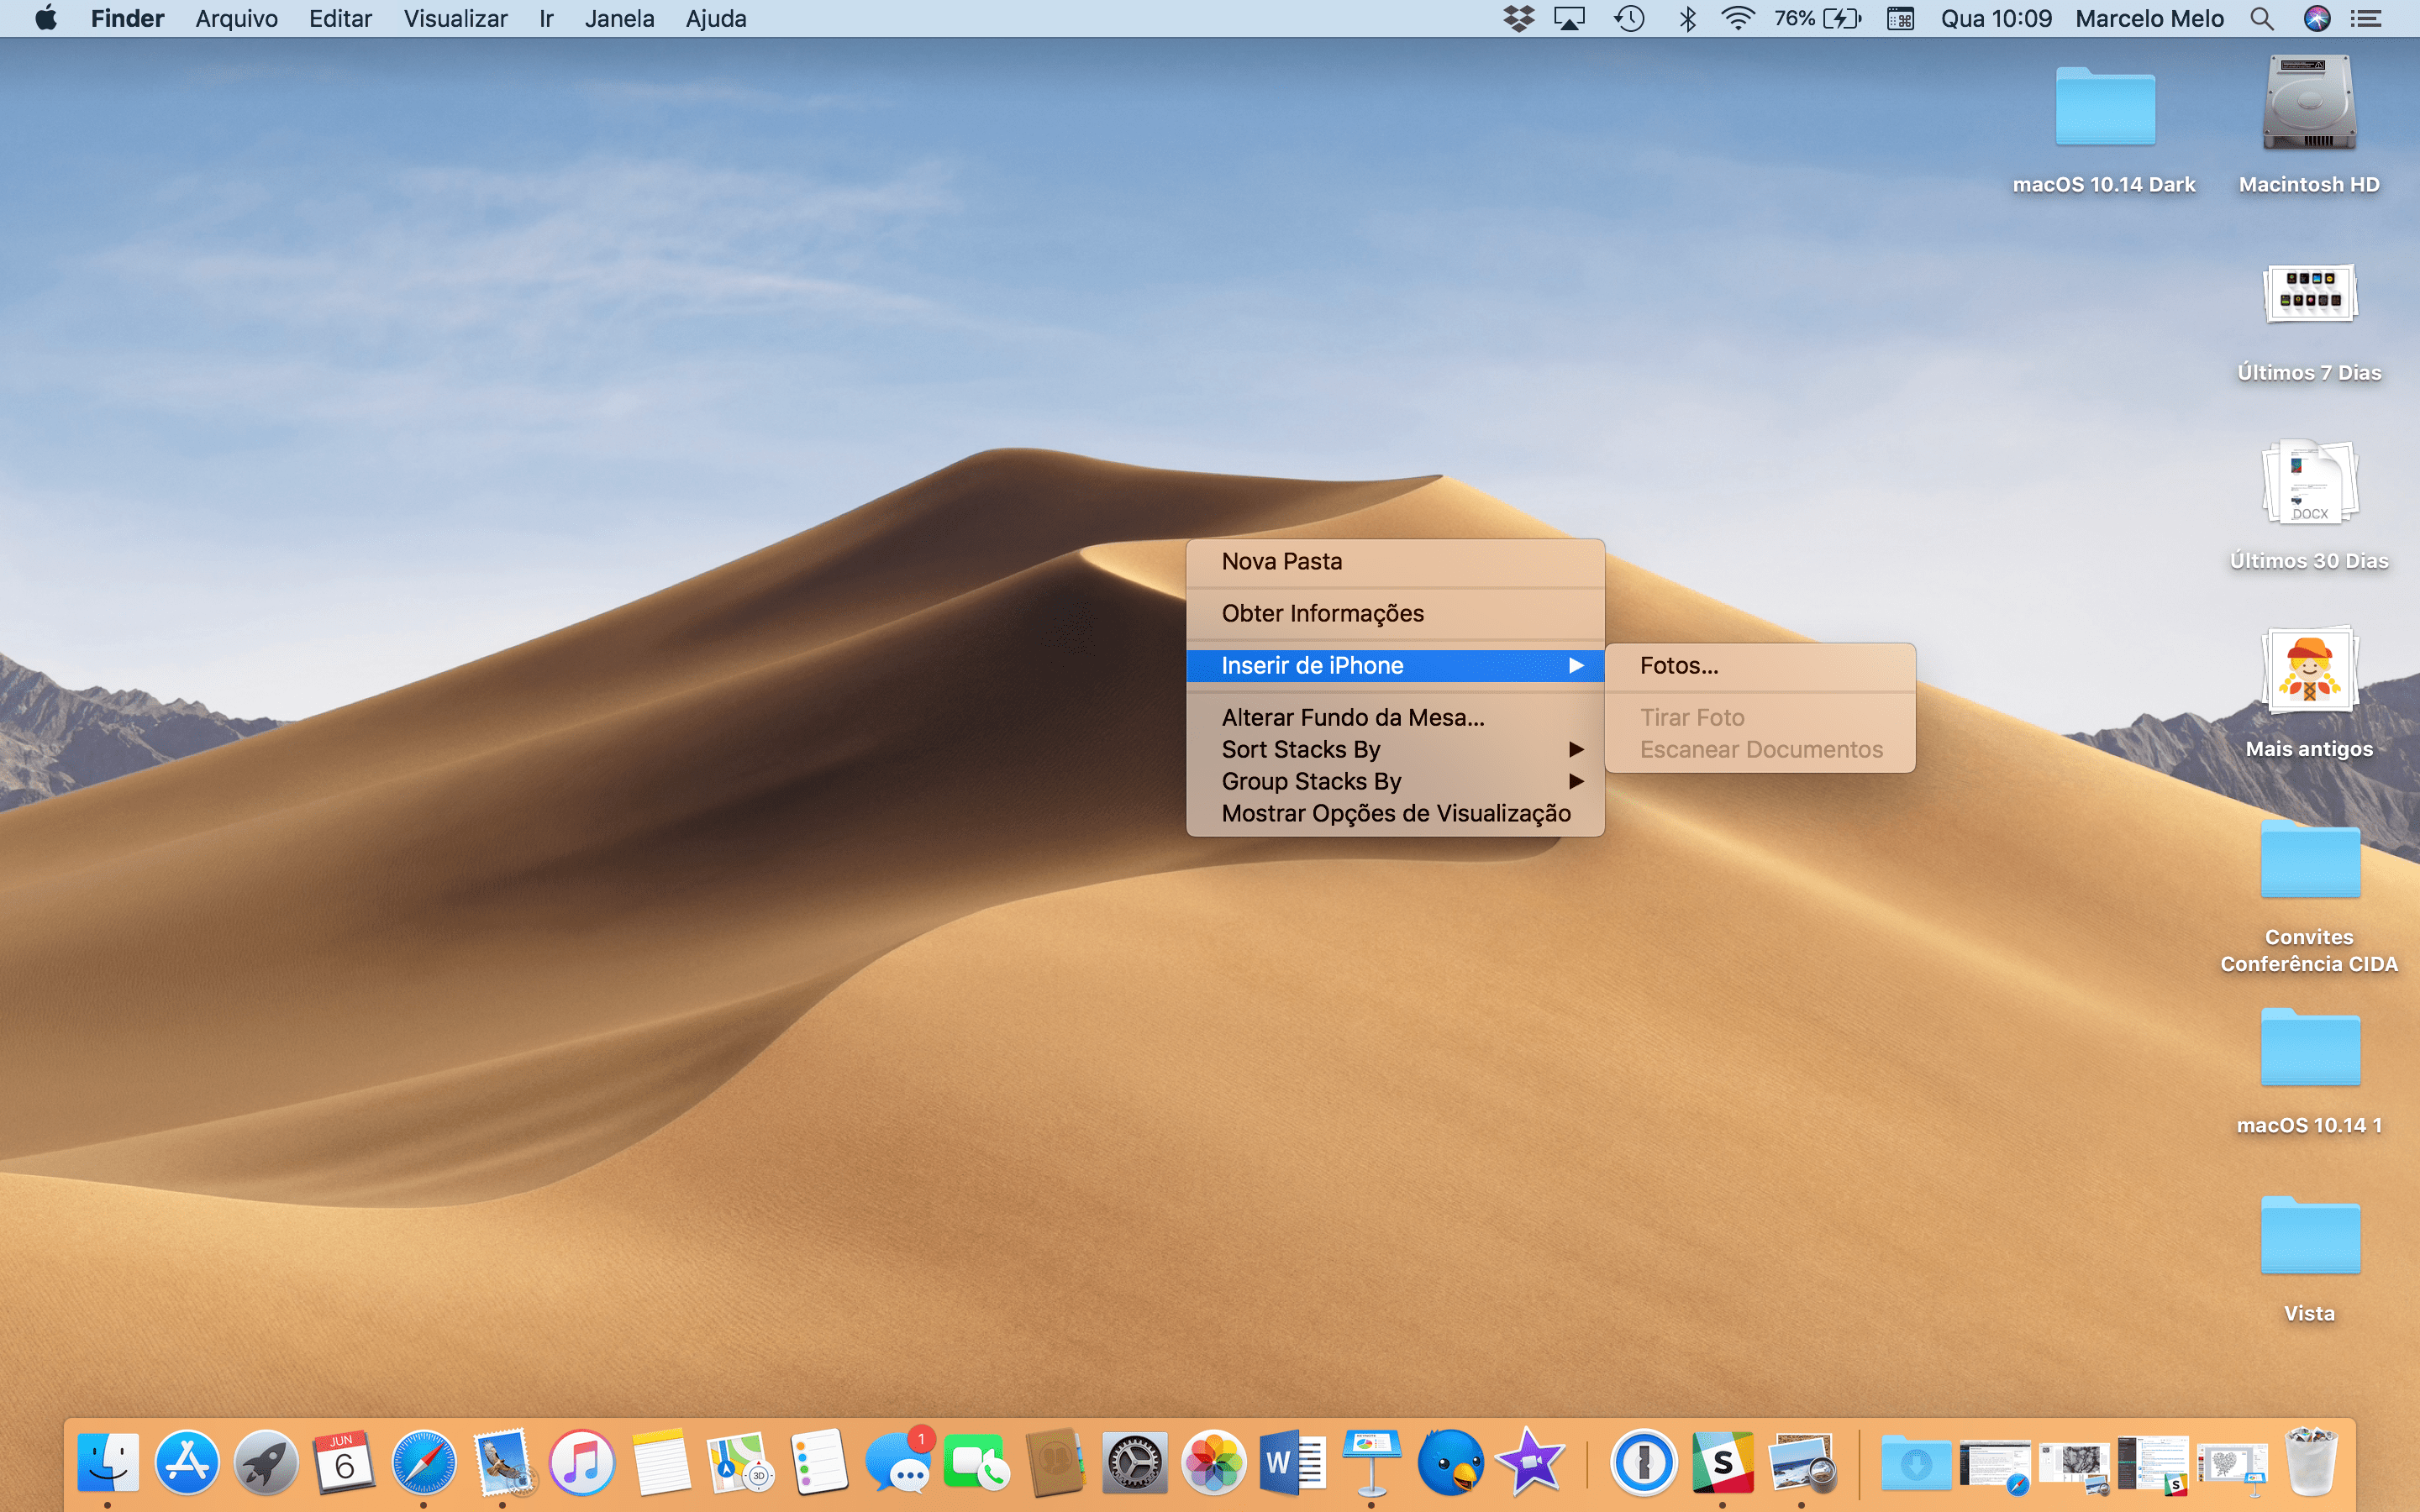 macos mojave 10.14.6 review